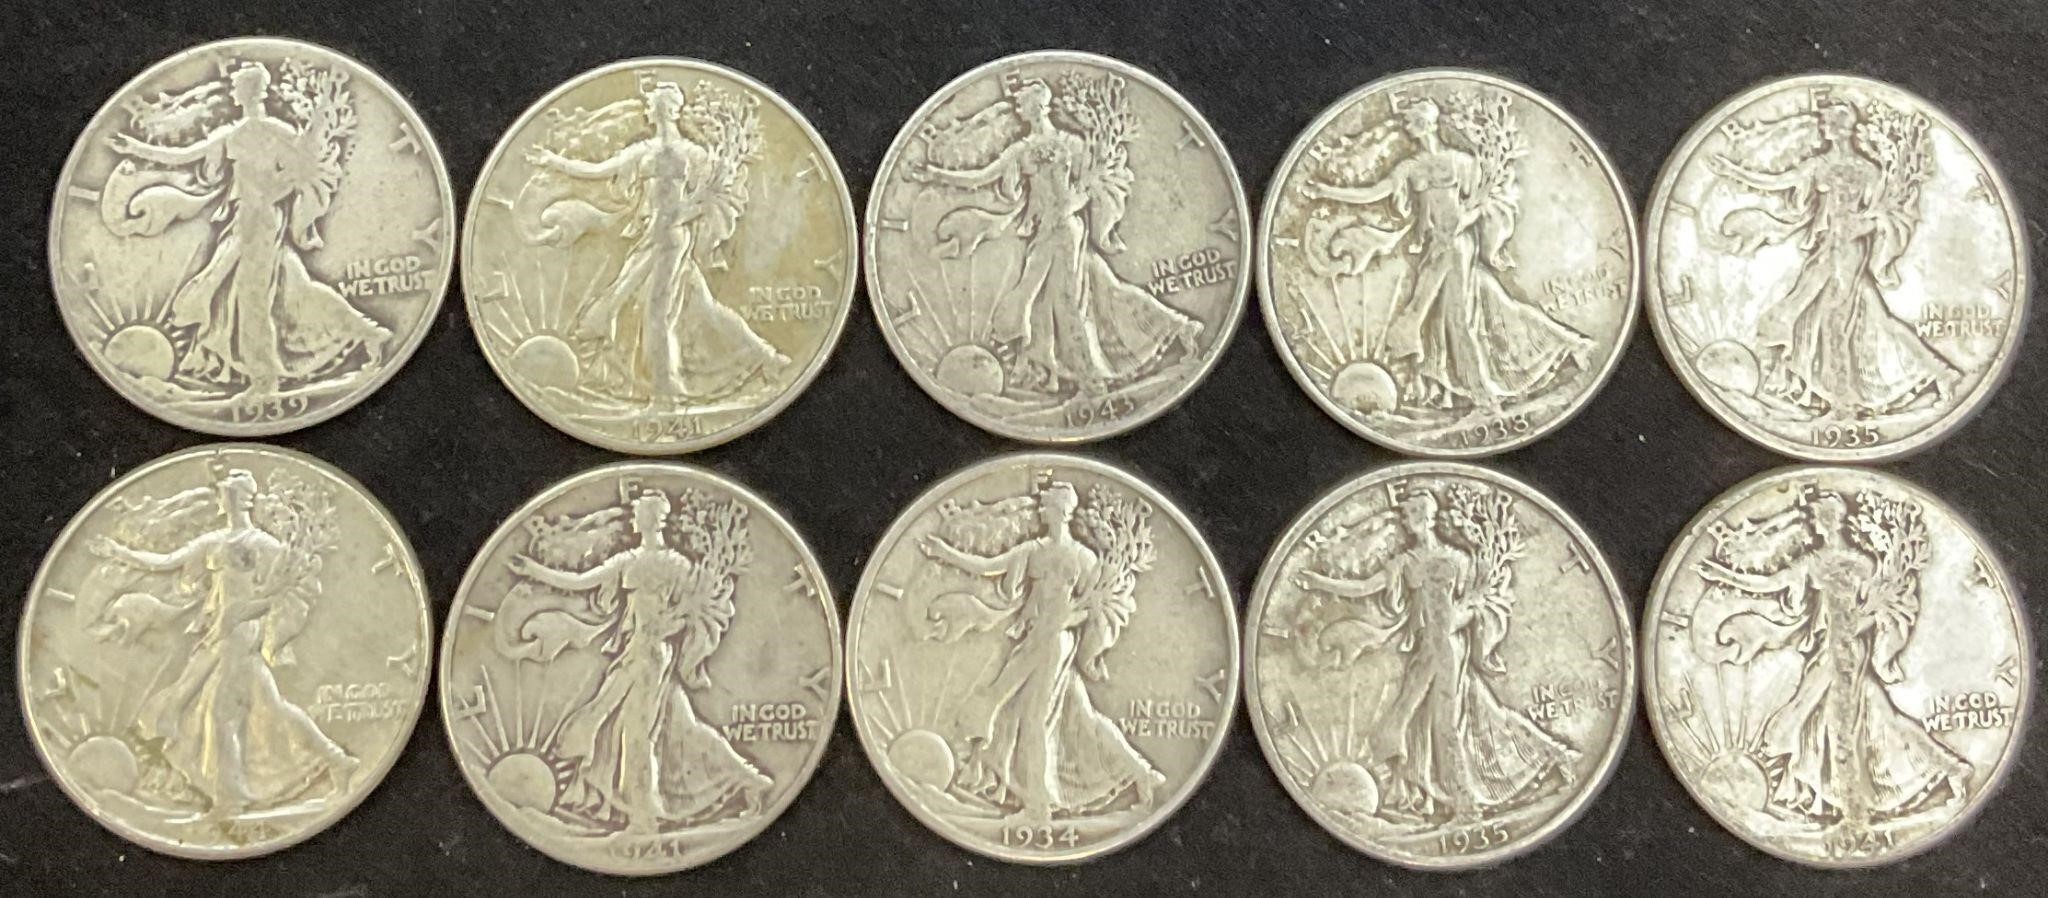 PAC SPRING COIN AND MILITARY COLLECTIBLES AUCTION